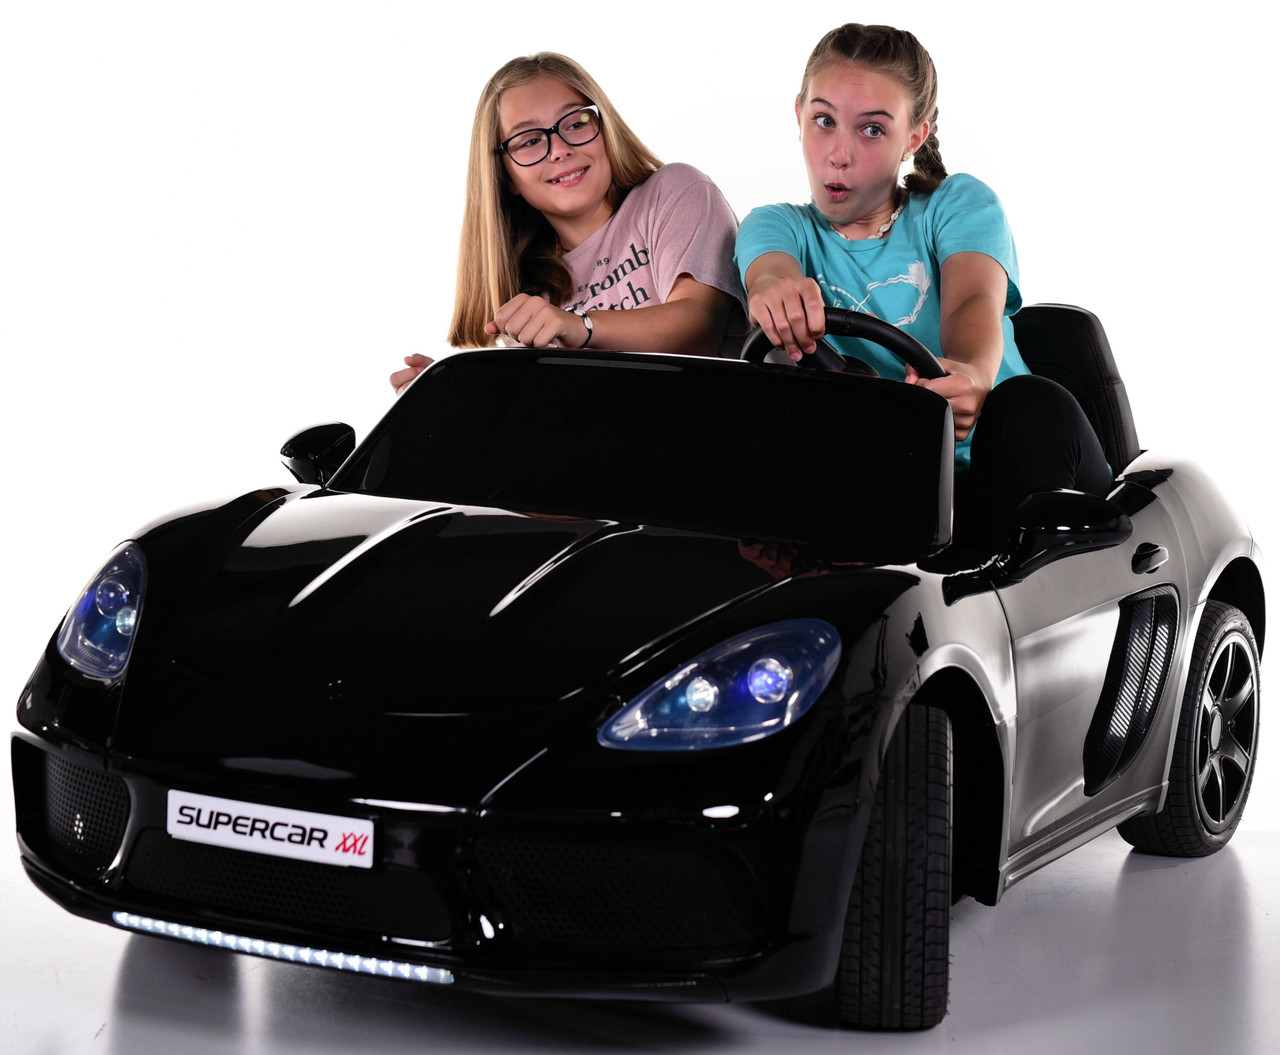 ride on cars for kids cheap